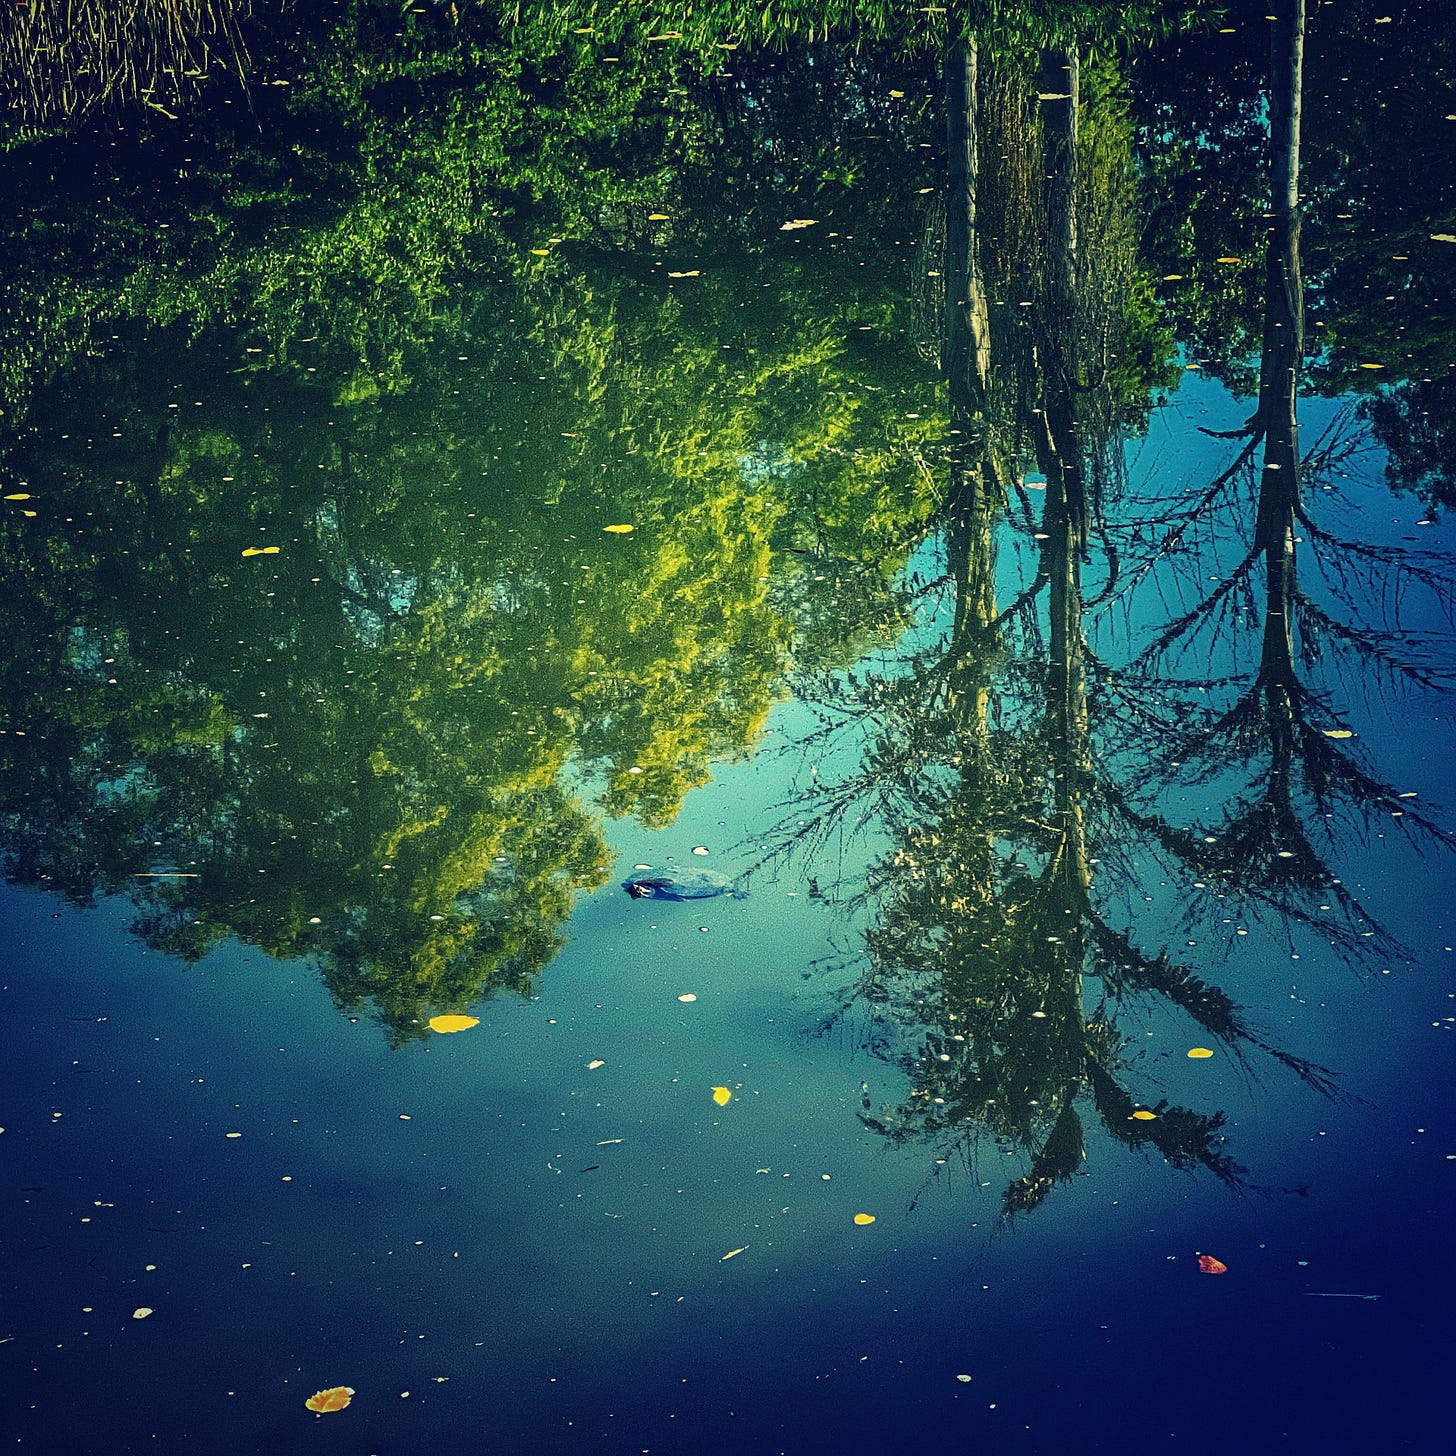 Reflected image of trees in water